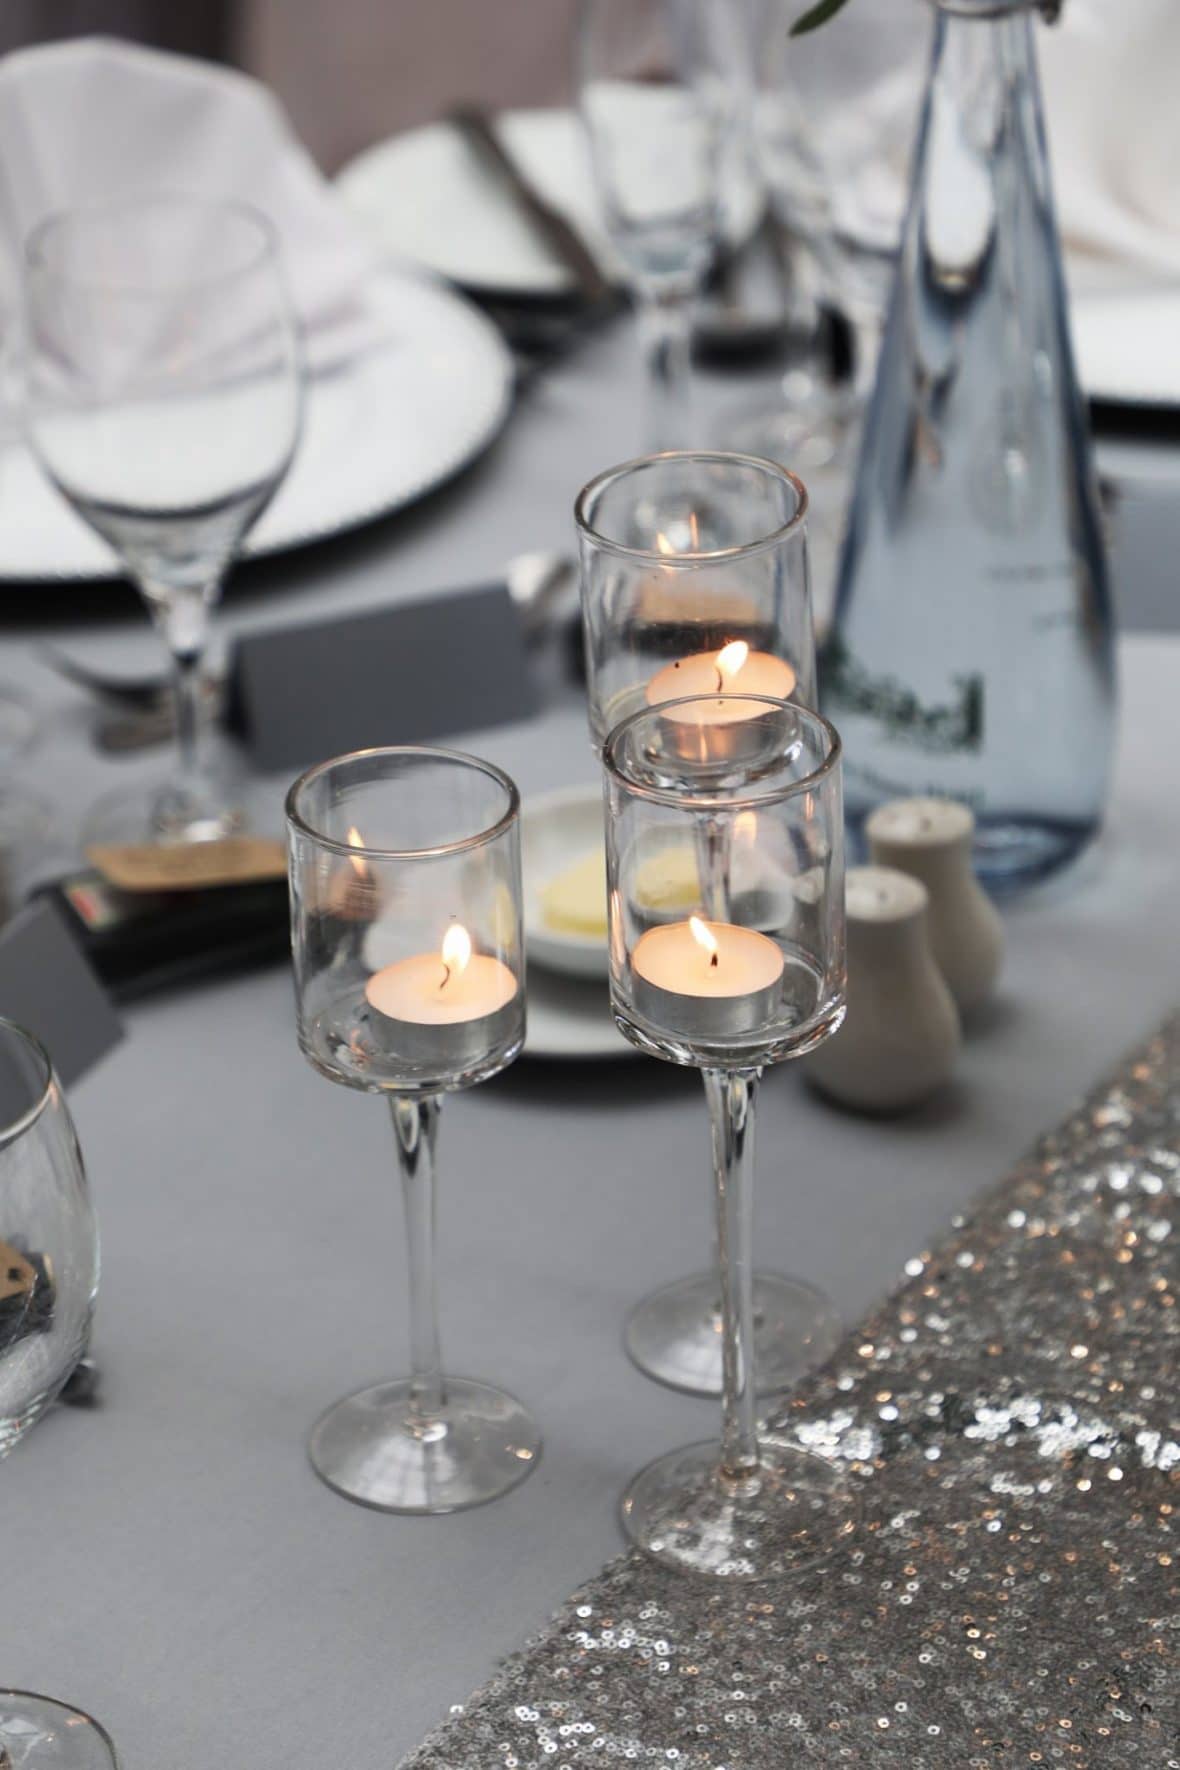 Staggered height glass tea light holders created warmth and brings a soft ambience to the decor